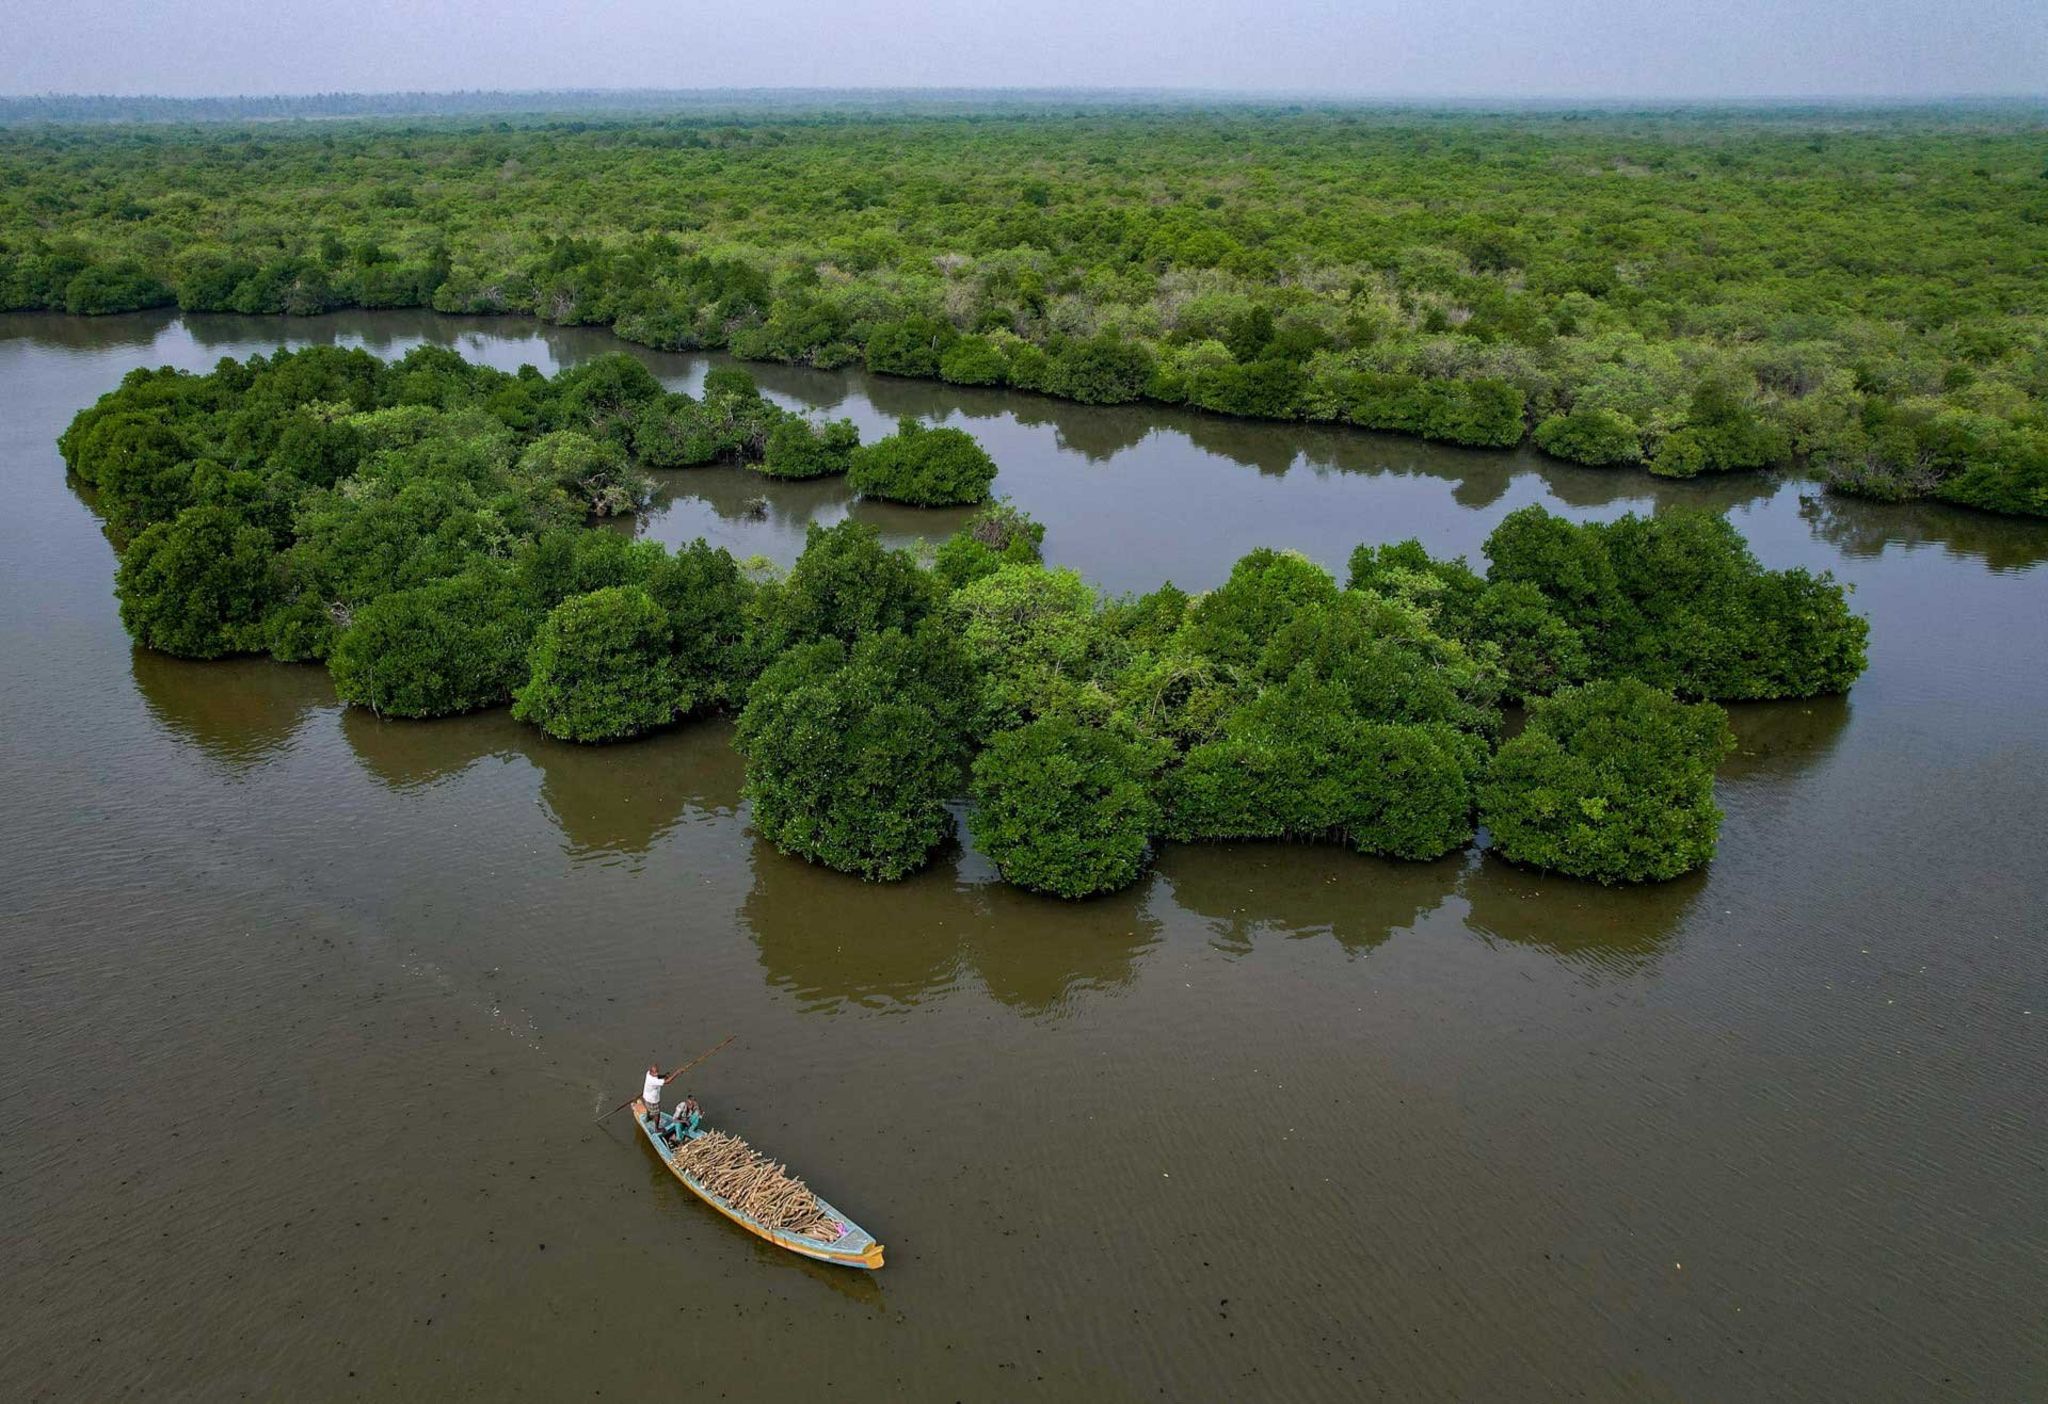 A small boat carrying timber collected from the mangrove forests flanking the canal leaves for the nearby coastal village.